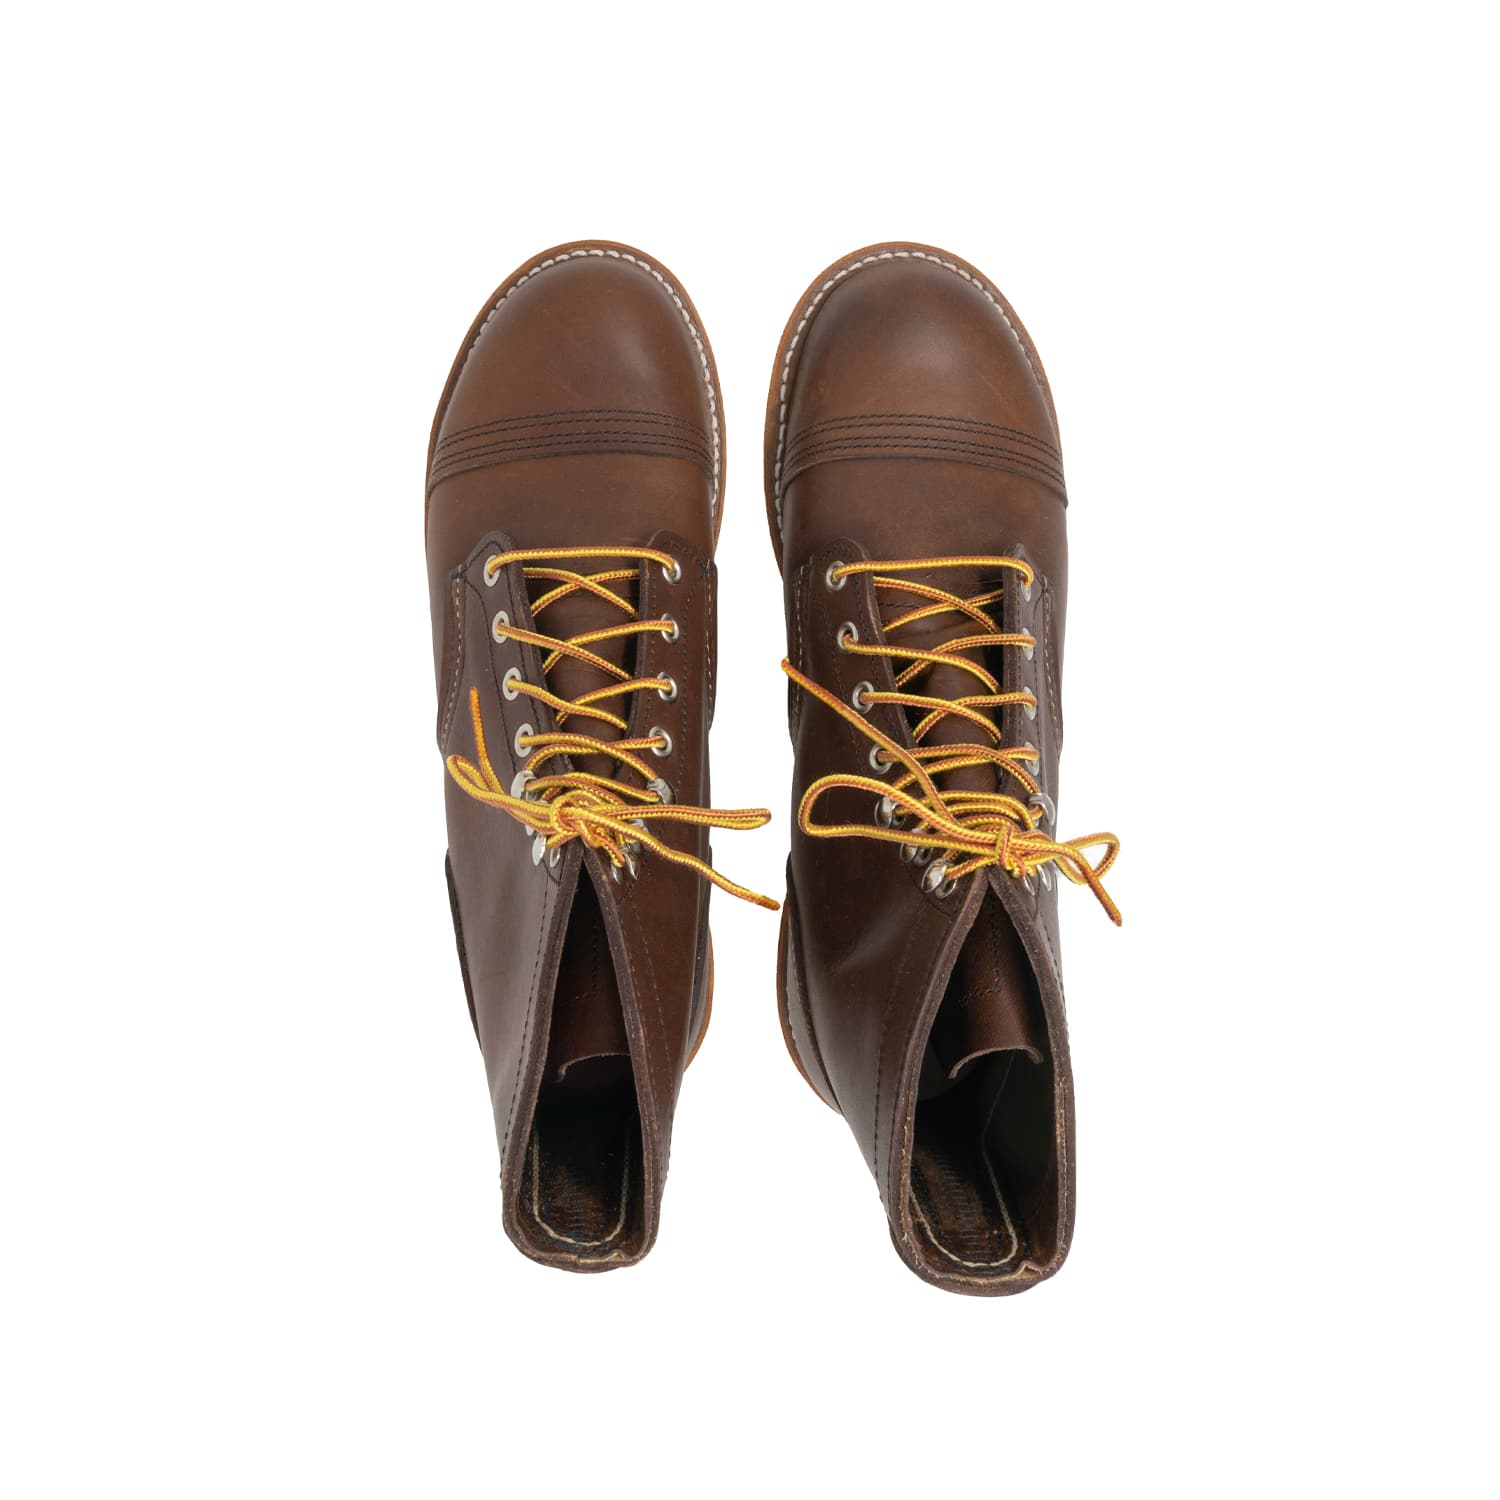 Just got leather laces for my Amber Harness Iron Rangers : r/RedWingShoes